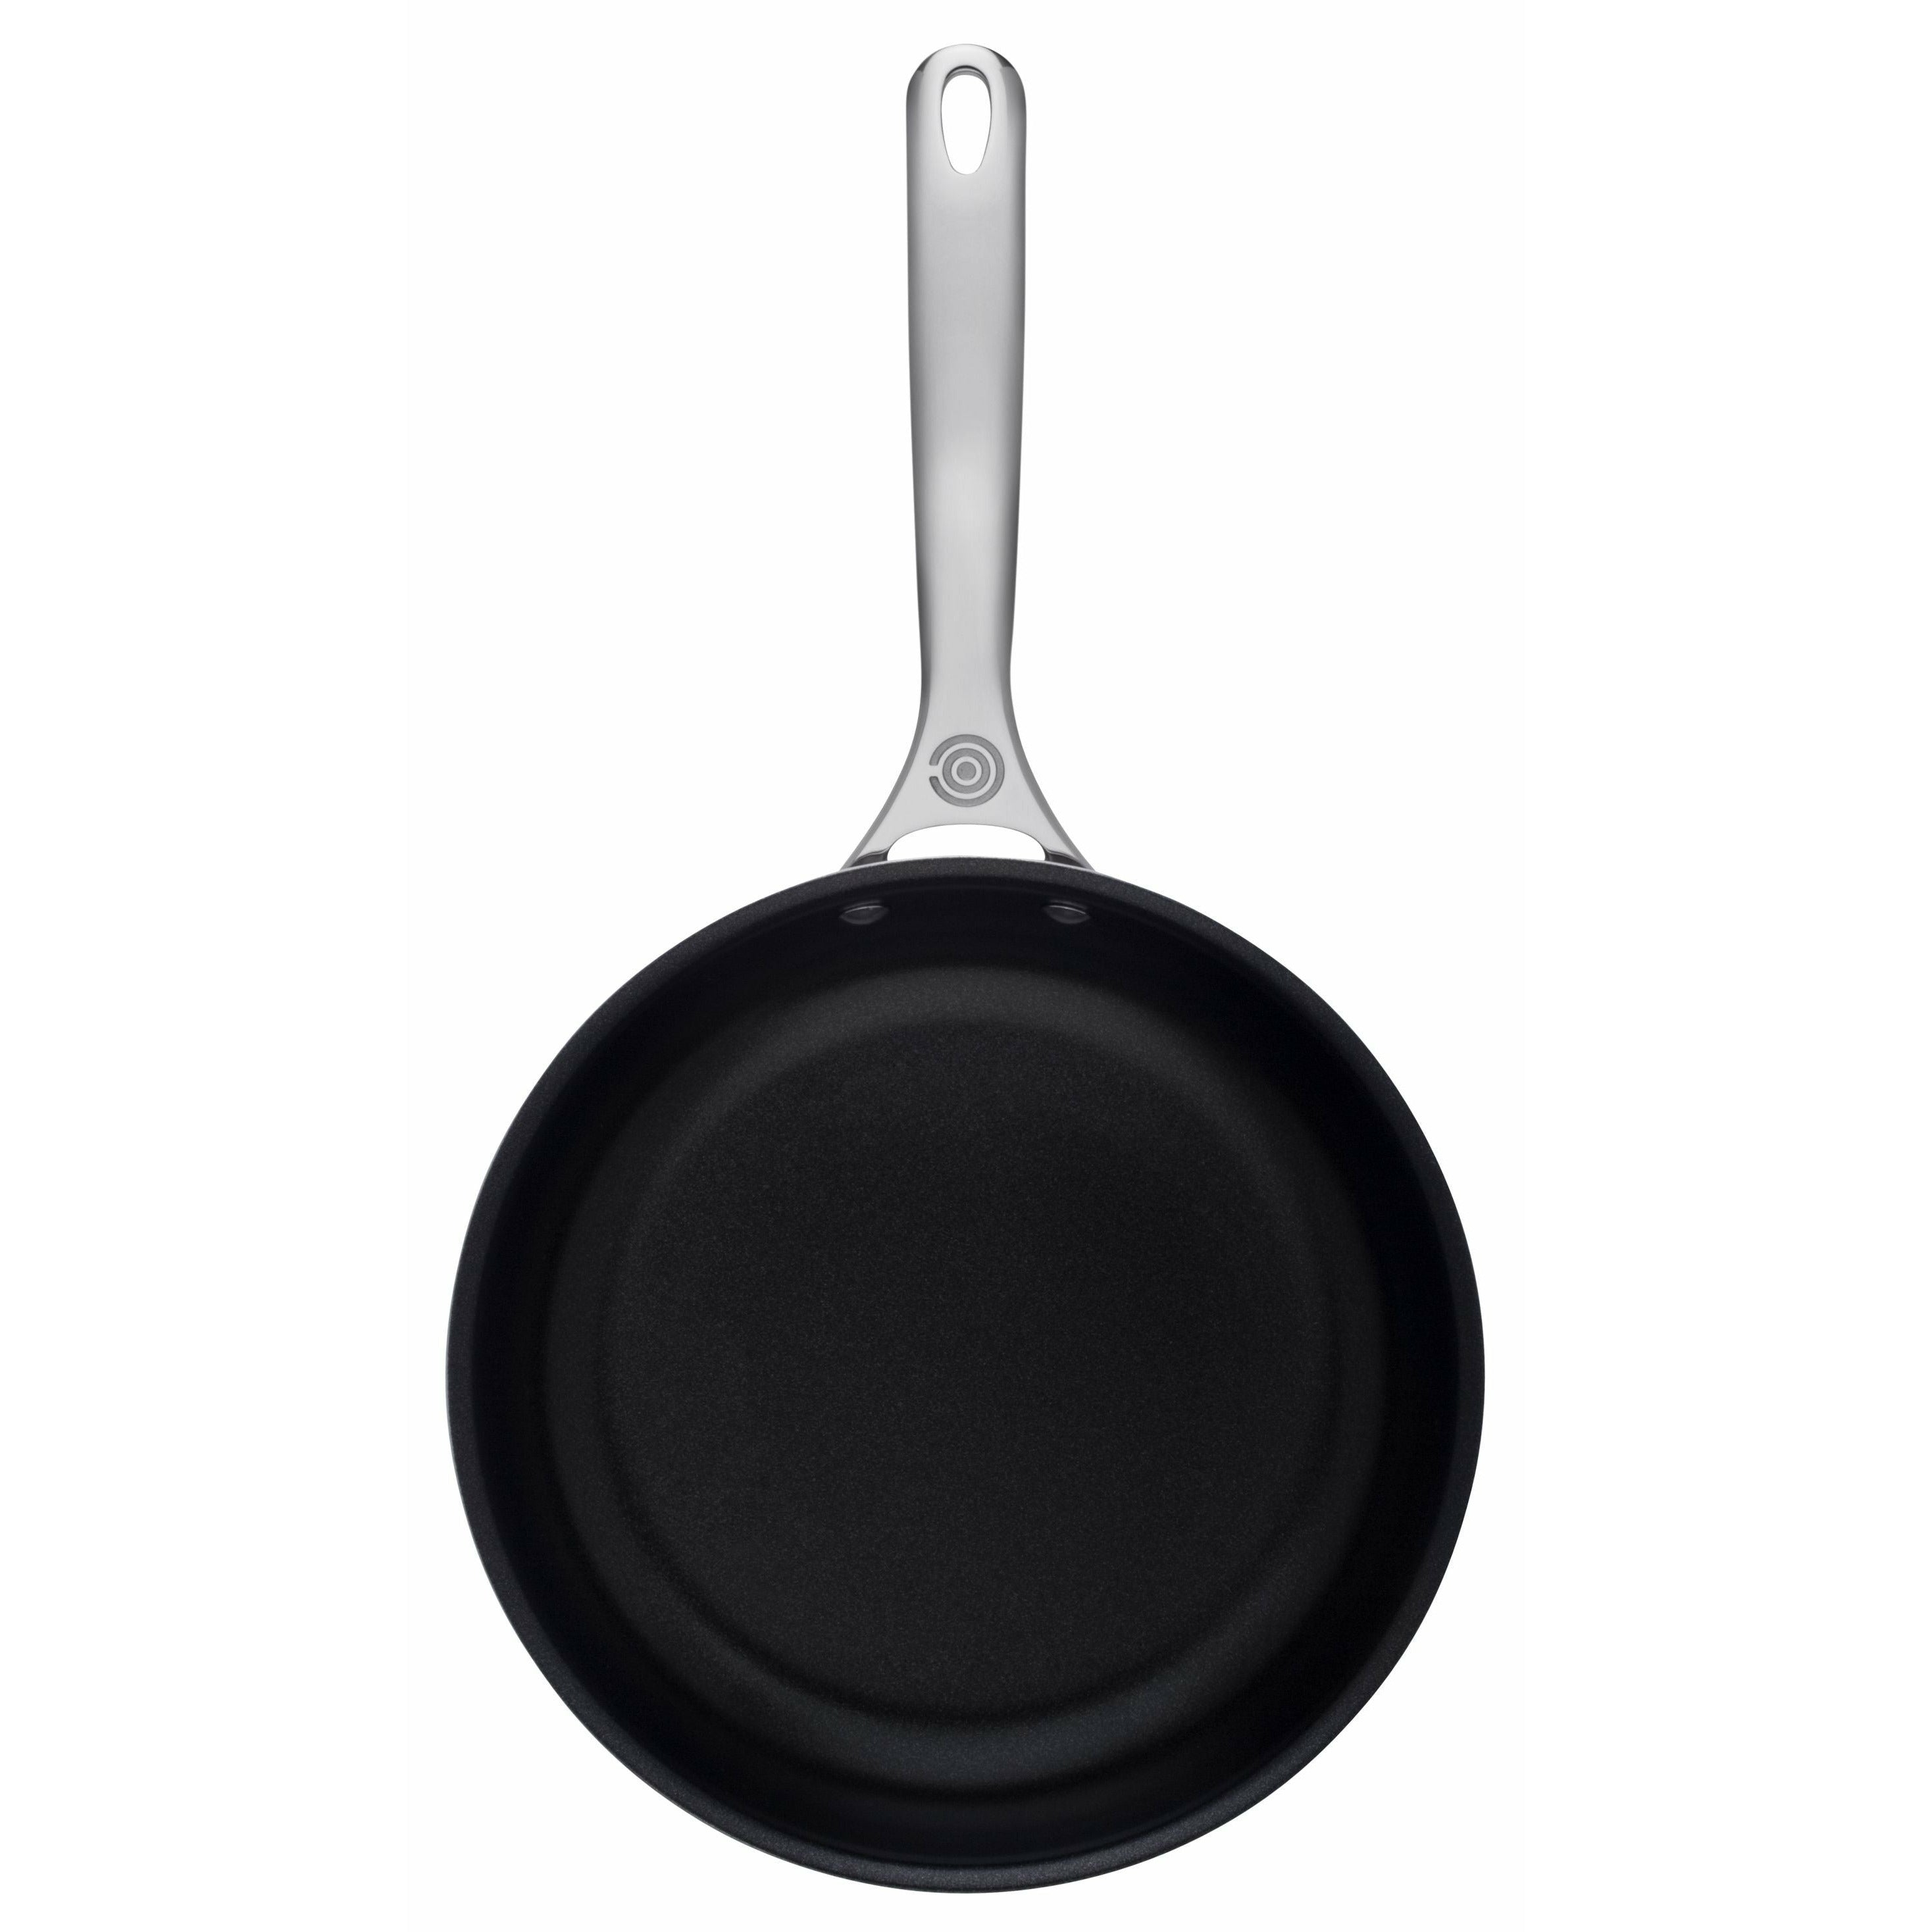 Le Creuset Signature Stainless Steel Non Stick Deep Frying Pan, 24 Cm